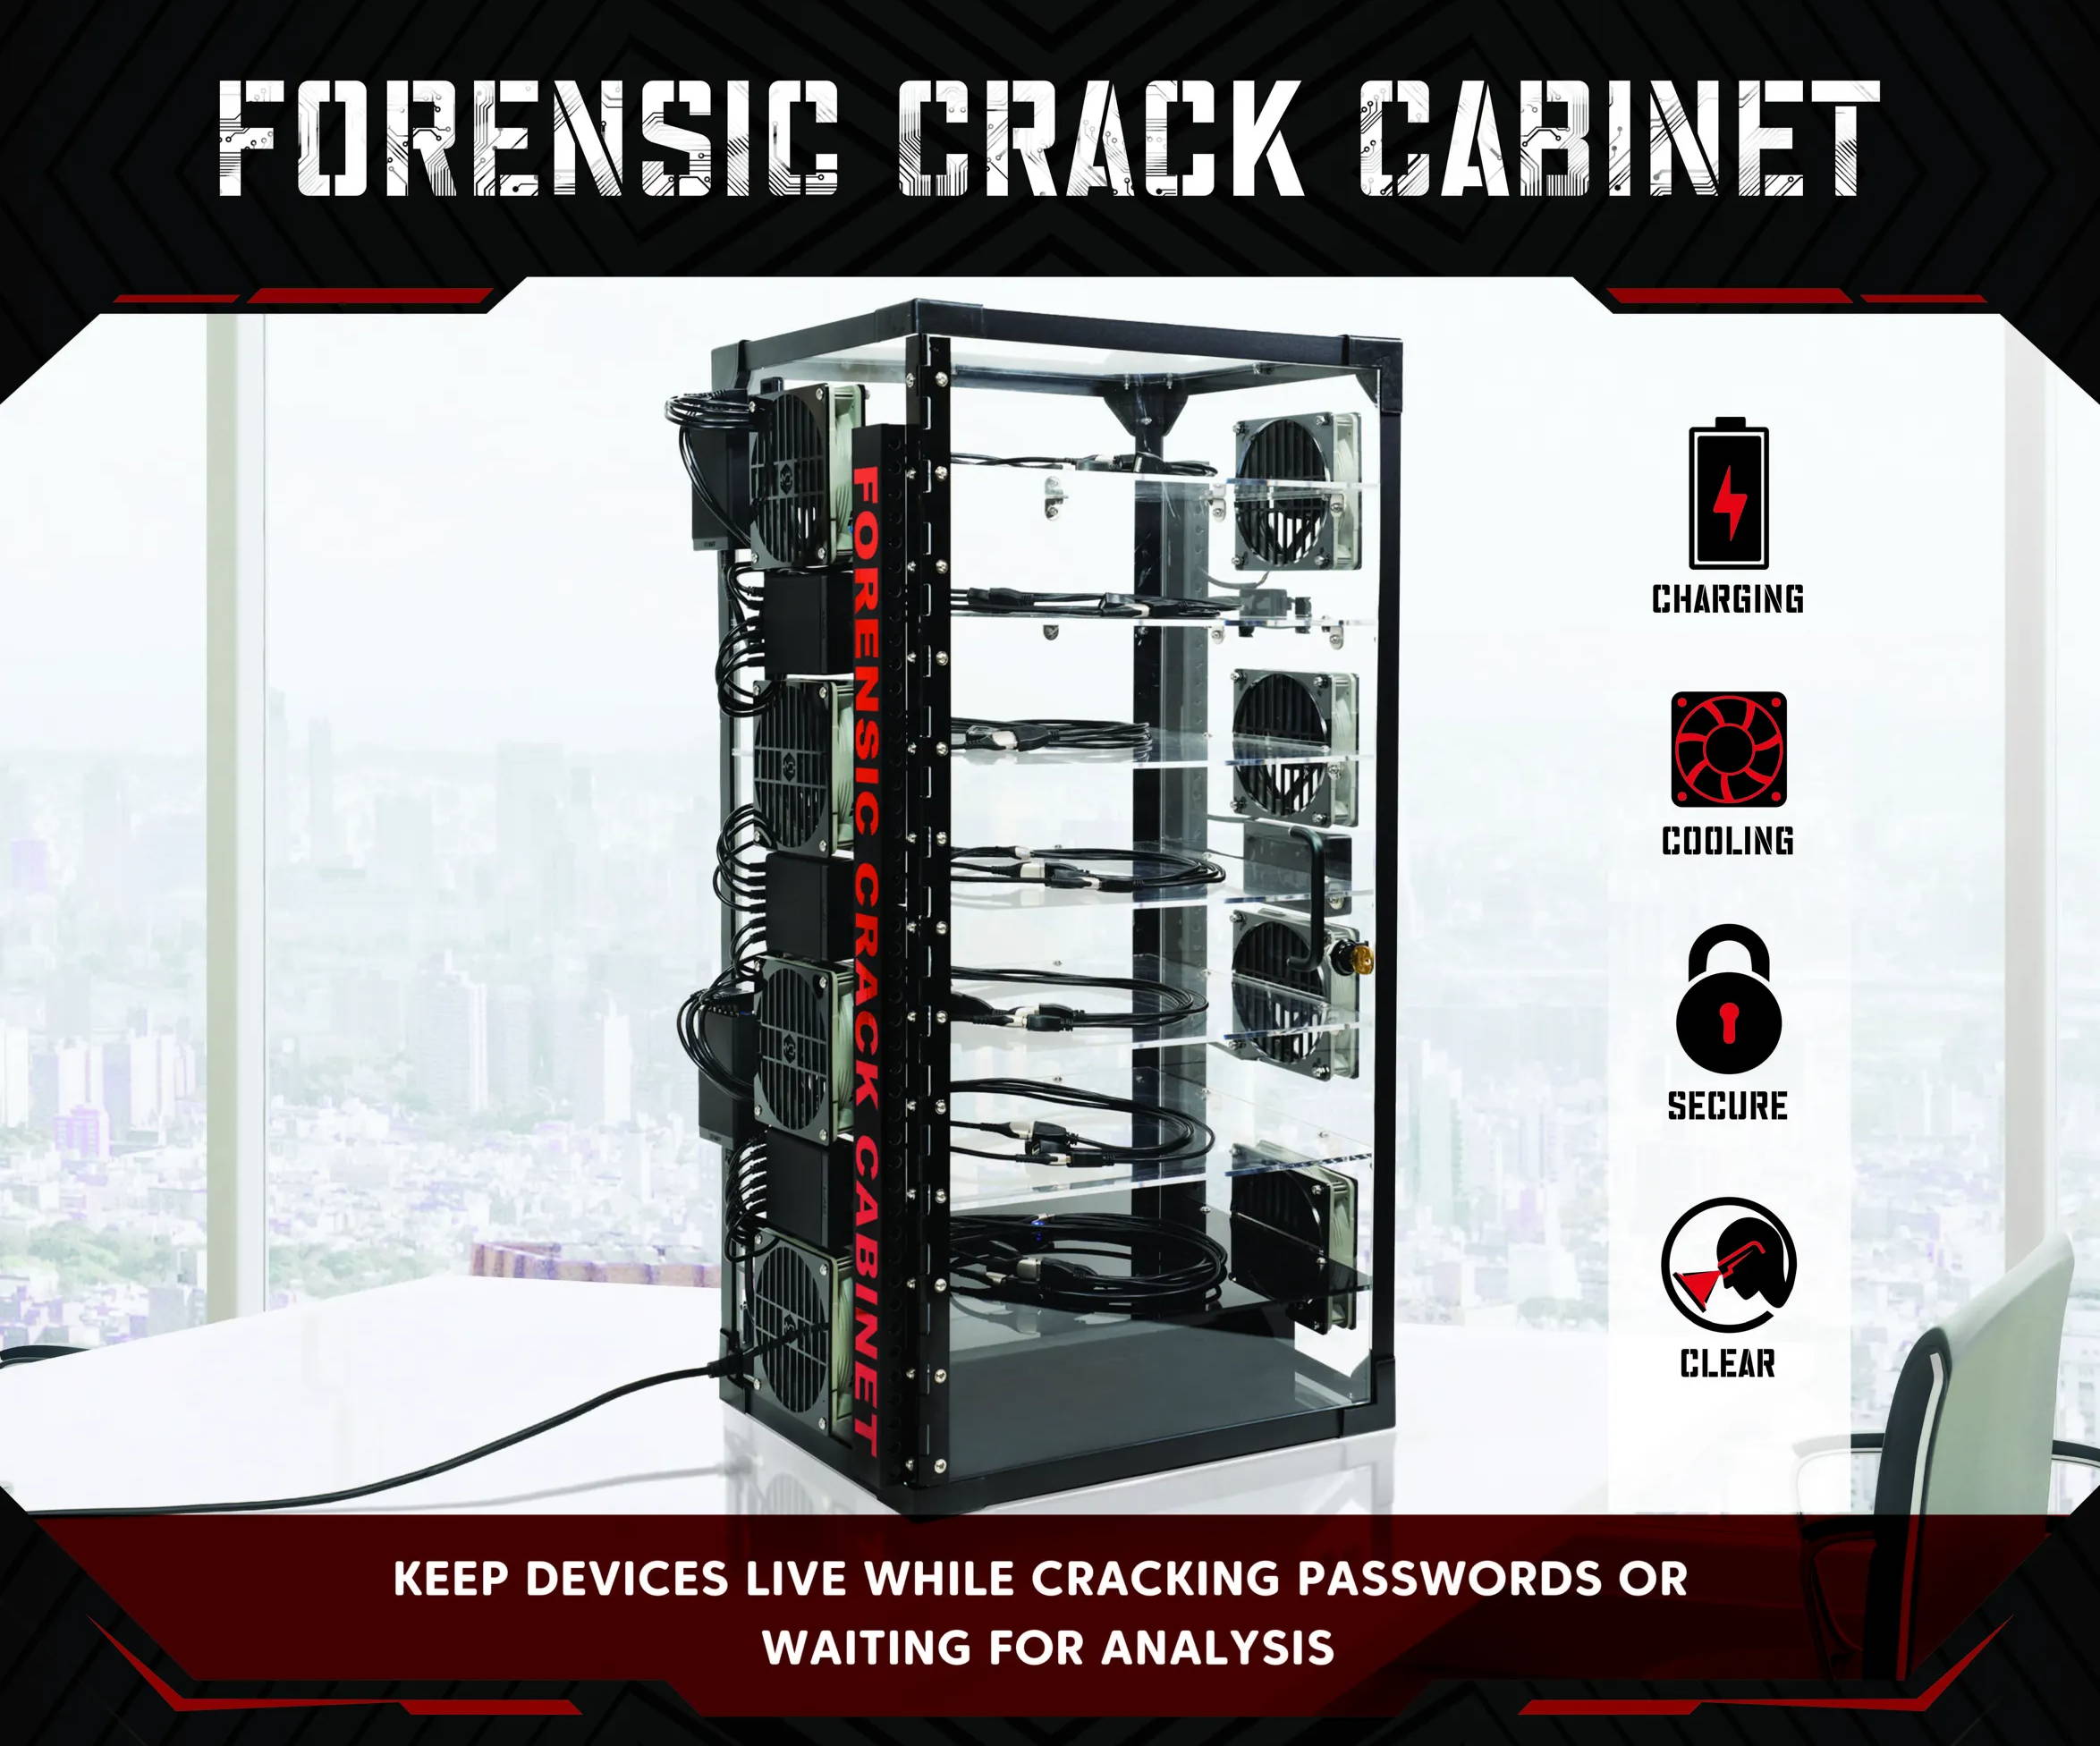 Mission Darkness Forensic Crack Cabinet charges, cools, and organizes cell phones waiting for analysis and passcode unlocking